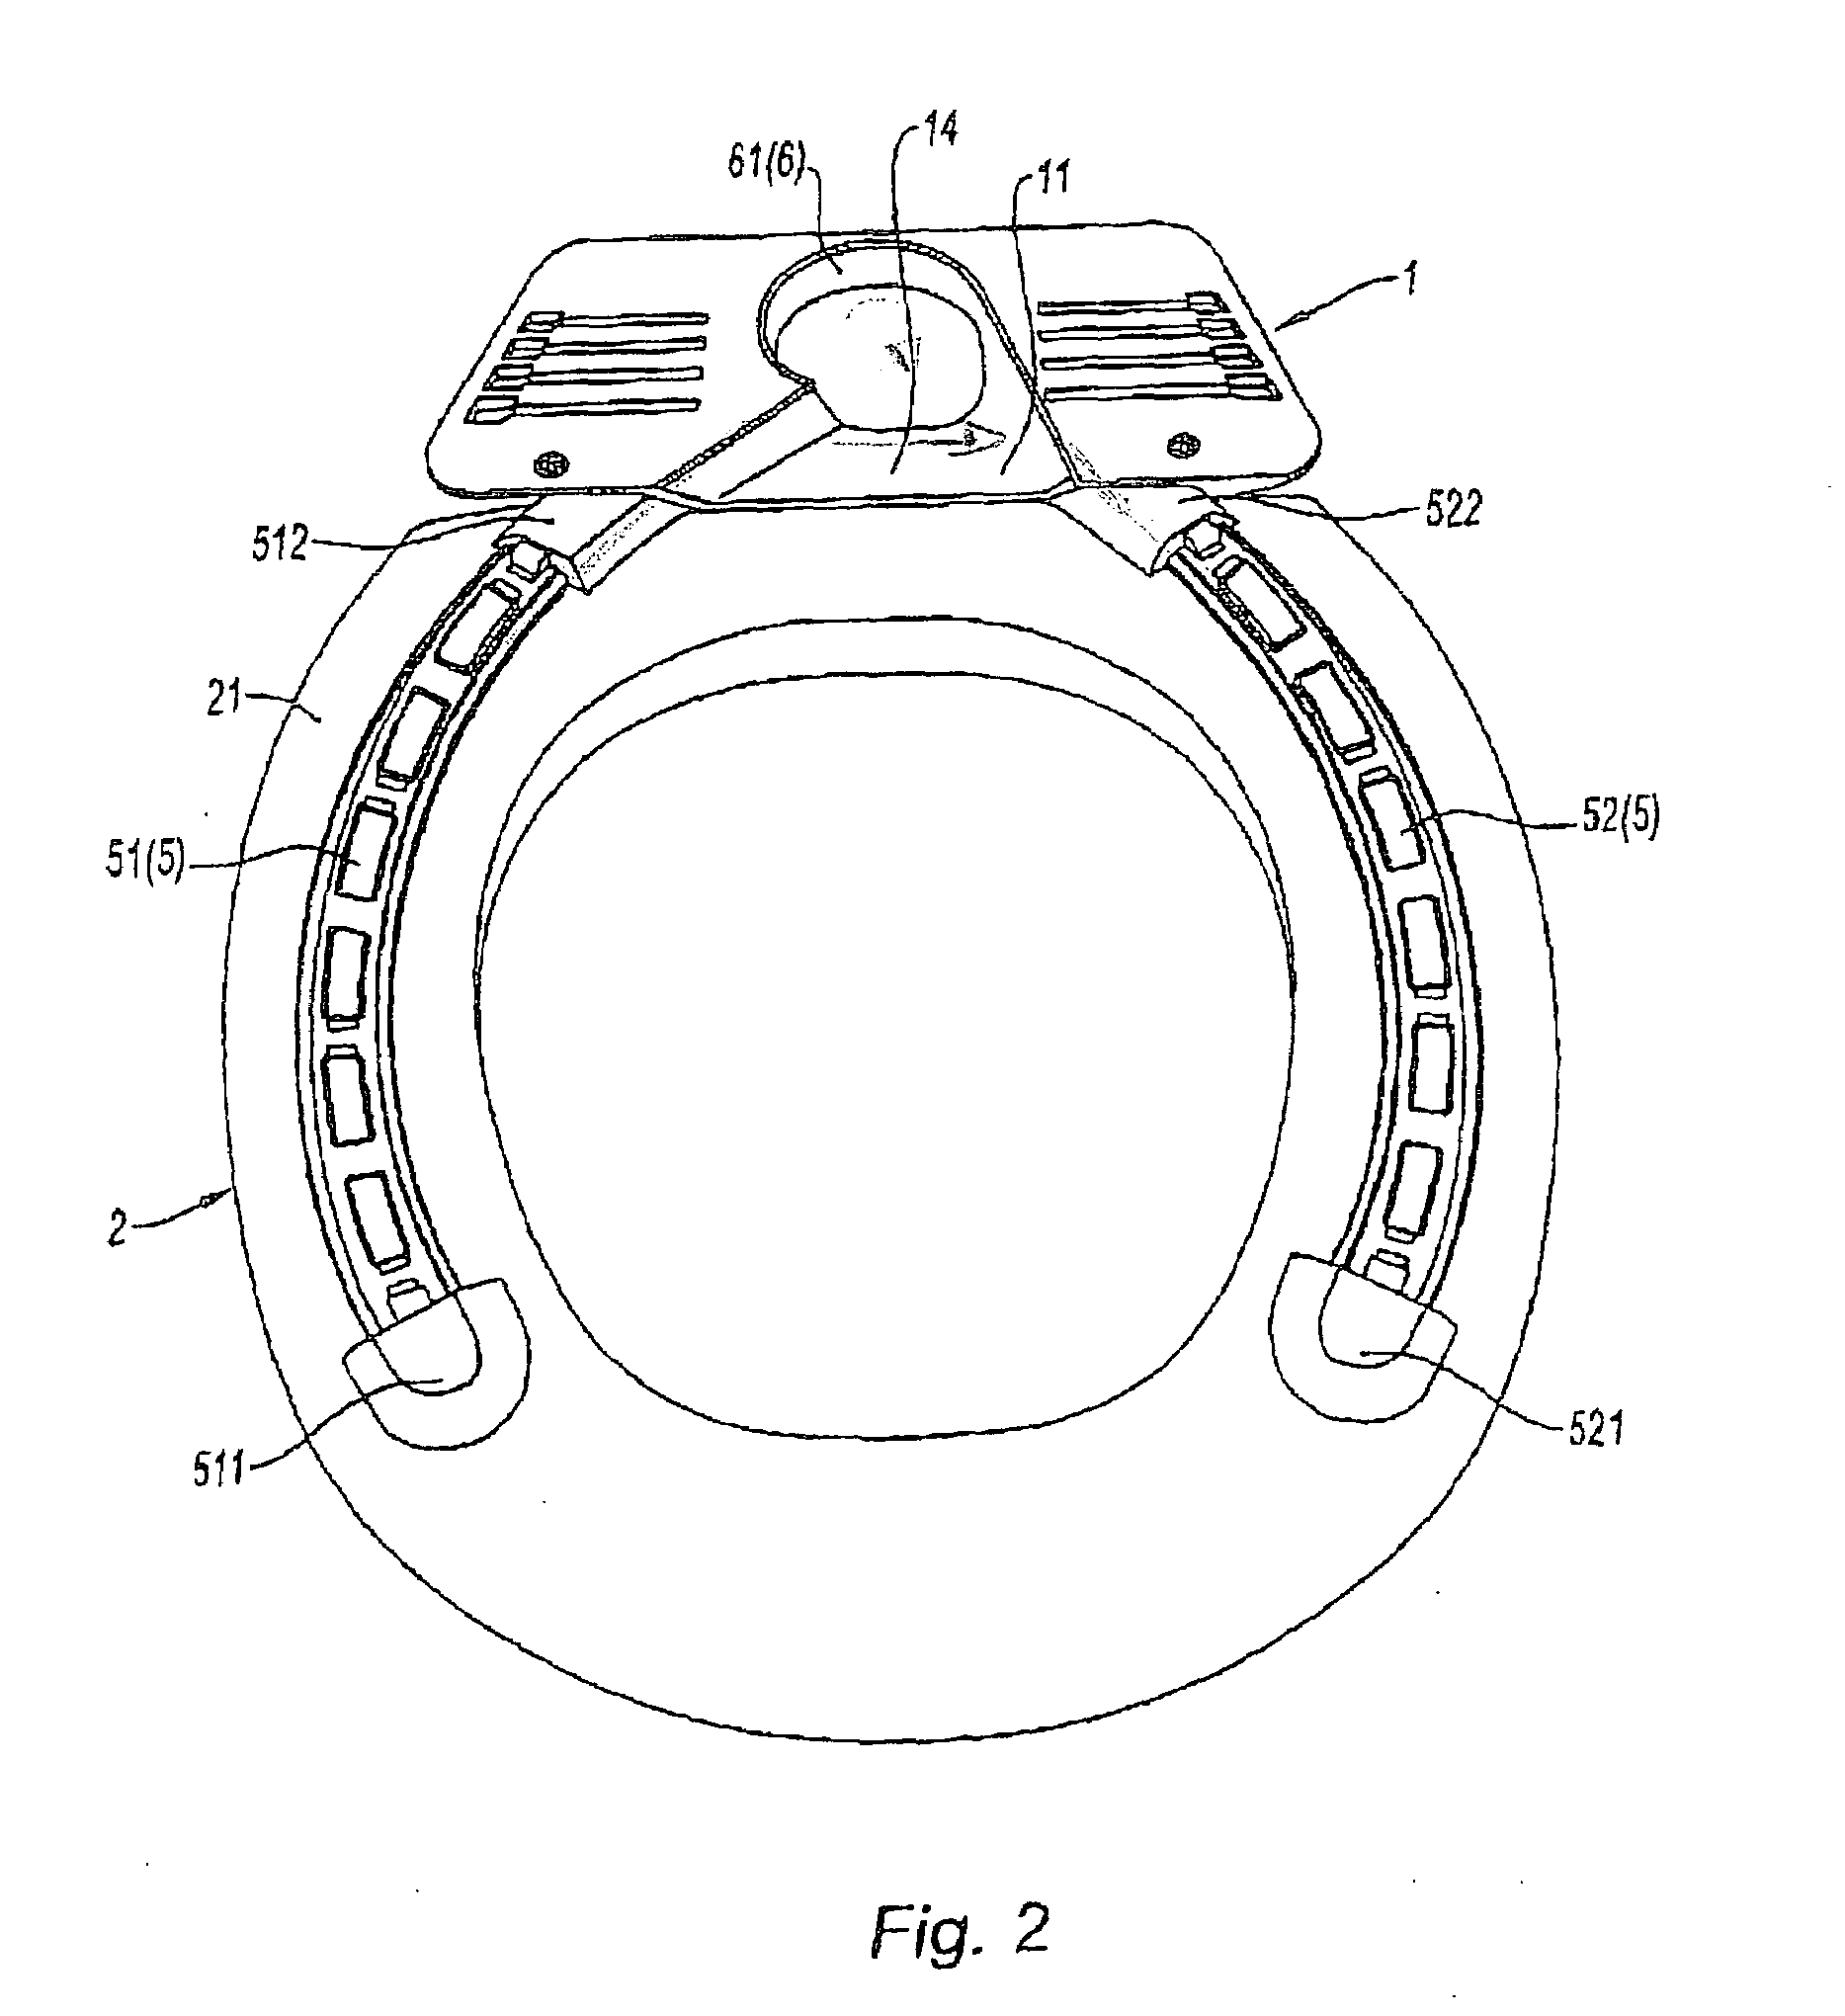 Toilet bowl assembly with air aspiration and filtration